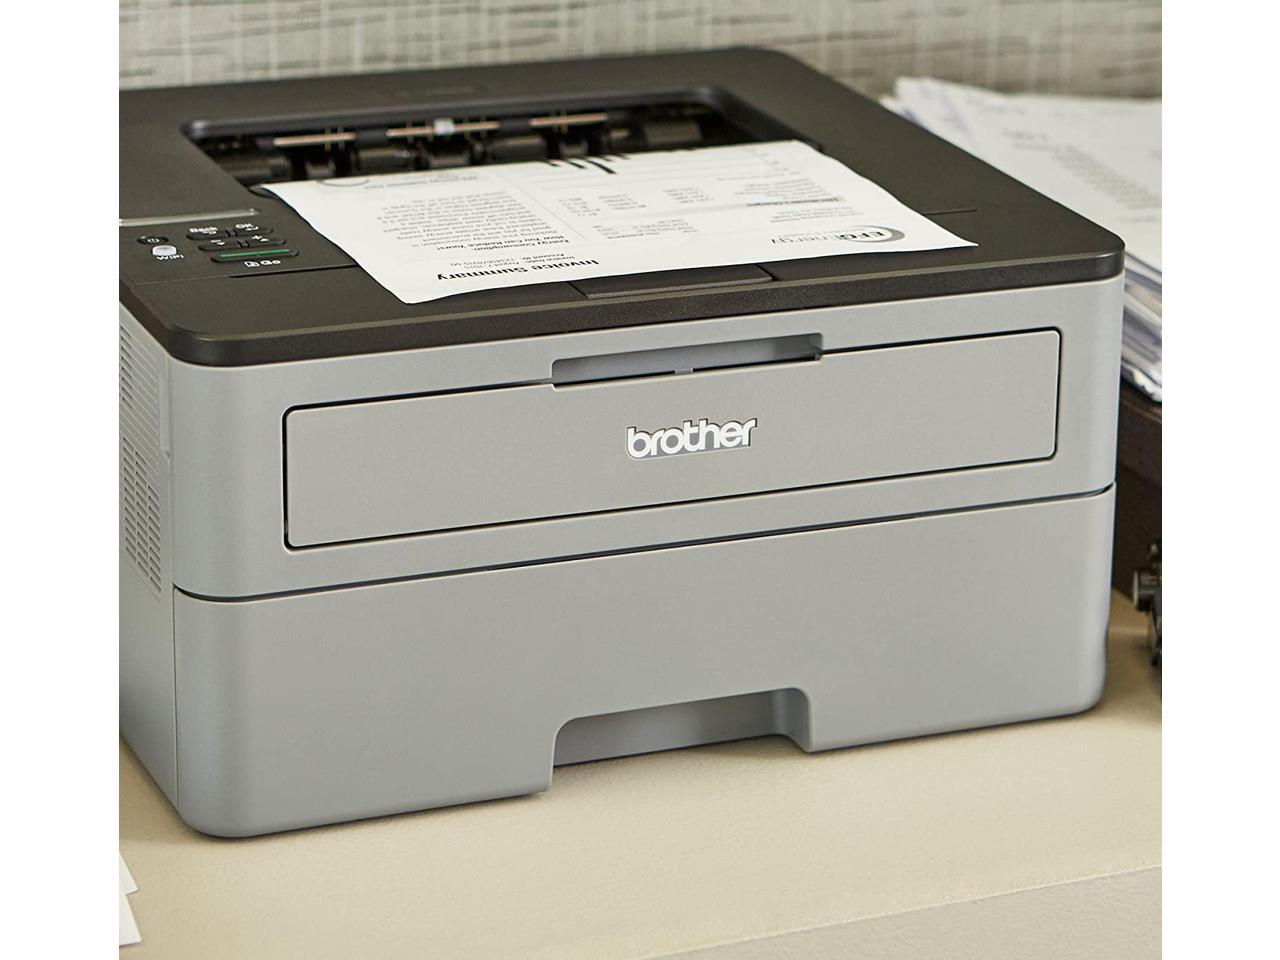 Brother Compact Monochrome Laser Printer, HL-L2350DW, Wireless Printing, Duplex Two-Sided Printing, Amazon Dash Replenishment Ready